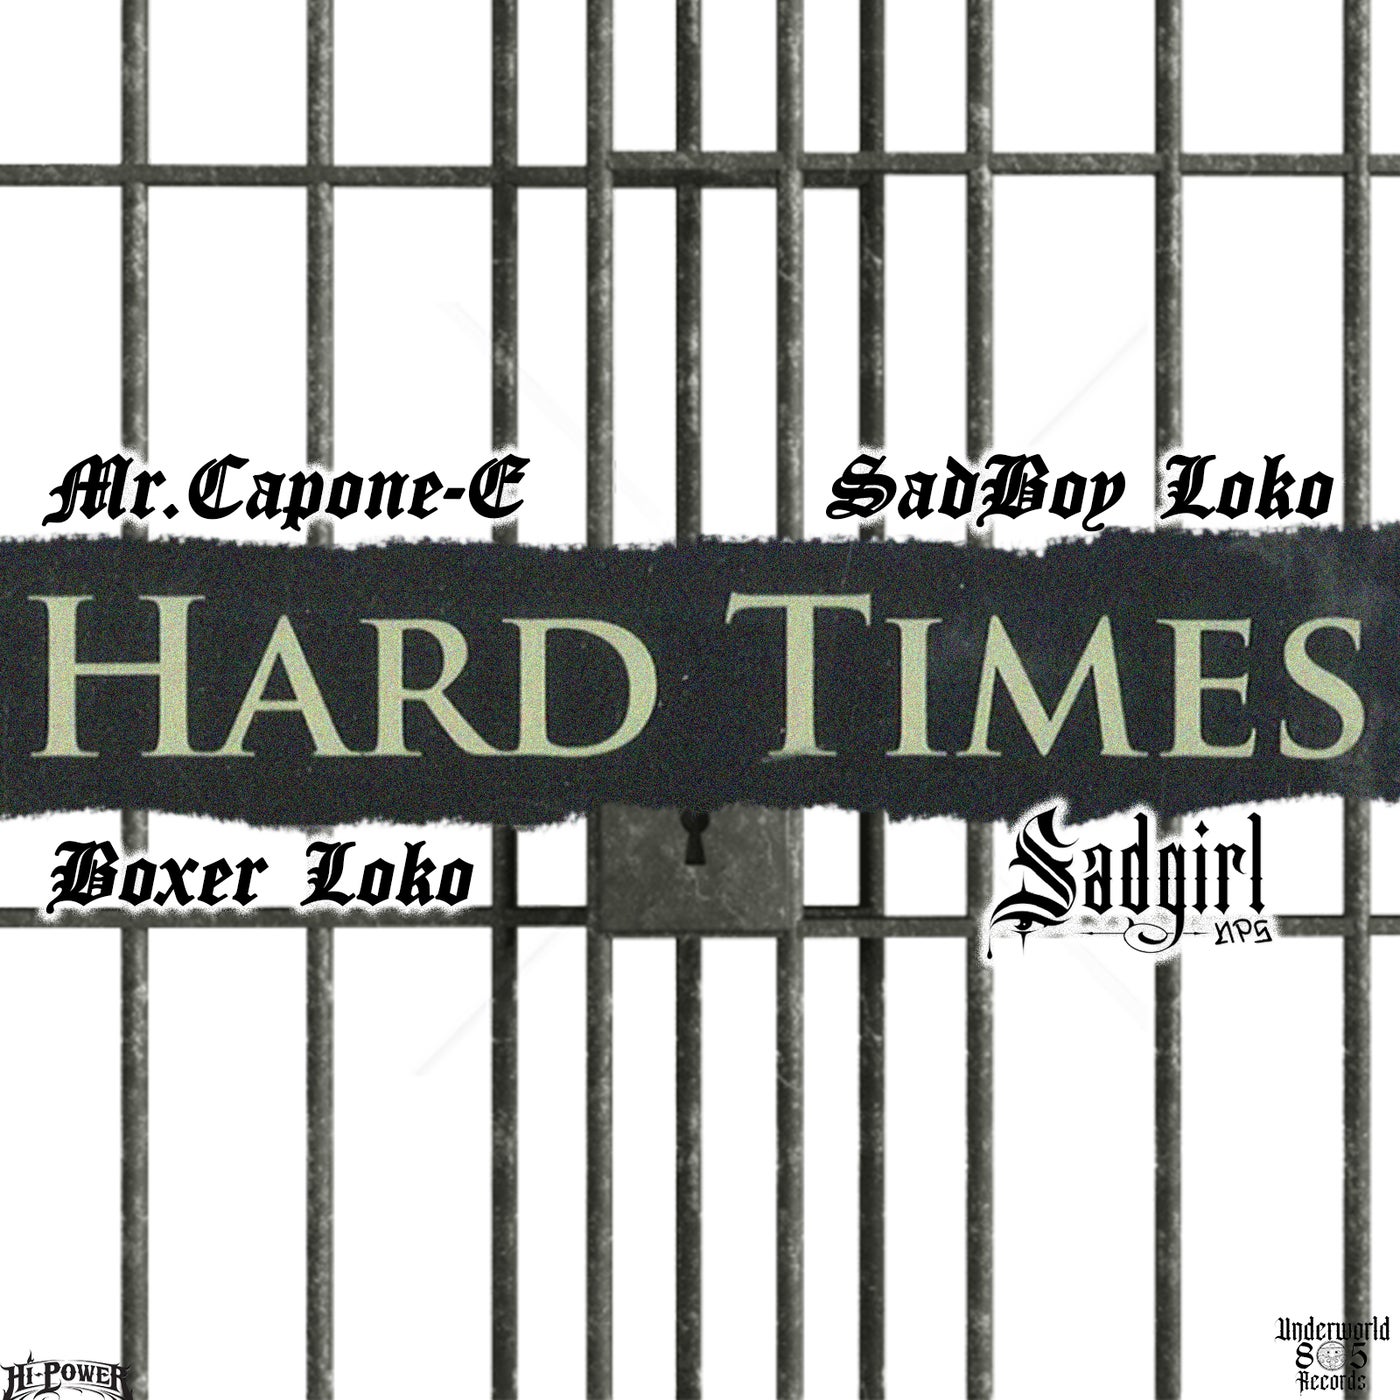 Have You Seen her (feat. Chevy Blue) by Mr.Capone-E and Chevy Blue